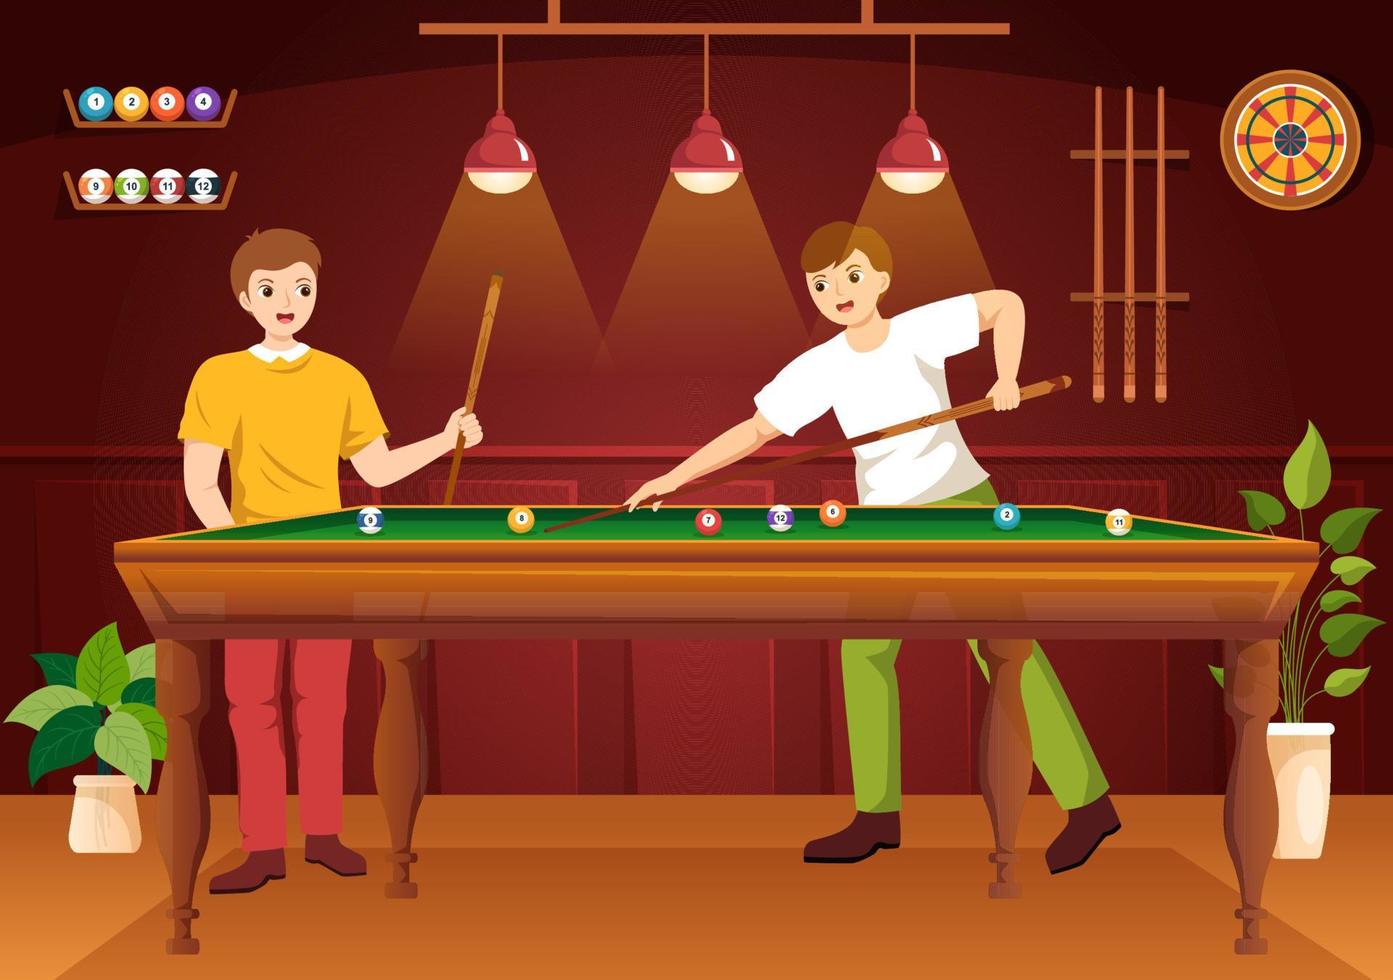 Billiards Game Illustration with Player Pool Room with Stick, Table and Billiard Balls in Sports Club in Flat Cartoon Hand Drawn Templates vector